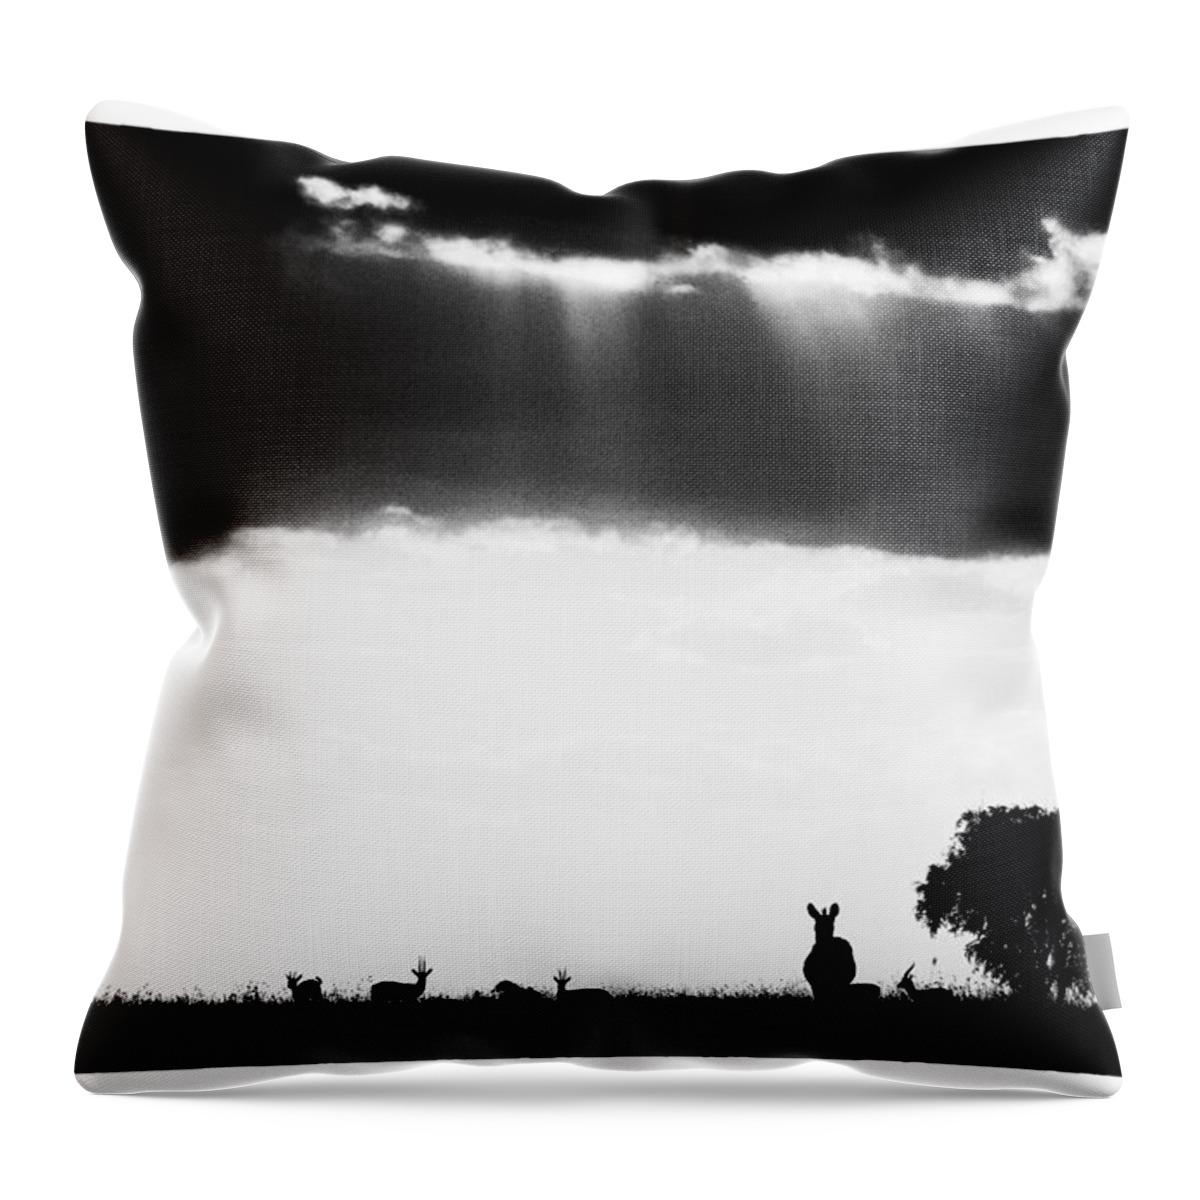 Africa Throw Pillow featuring the photograph Stormy Silhoettes by Mike Gaudaur